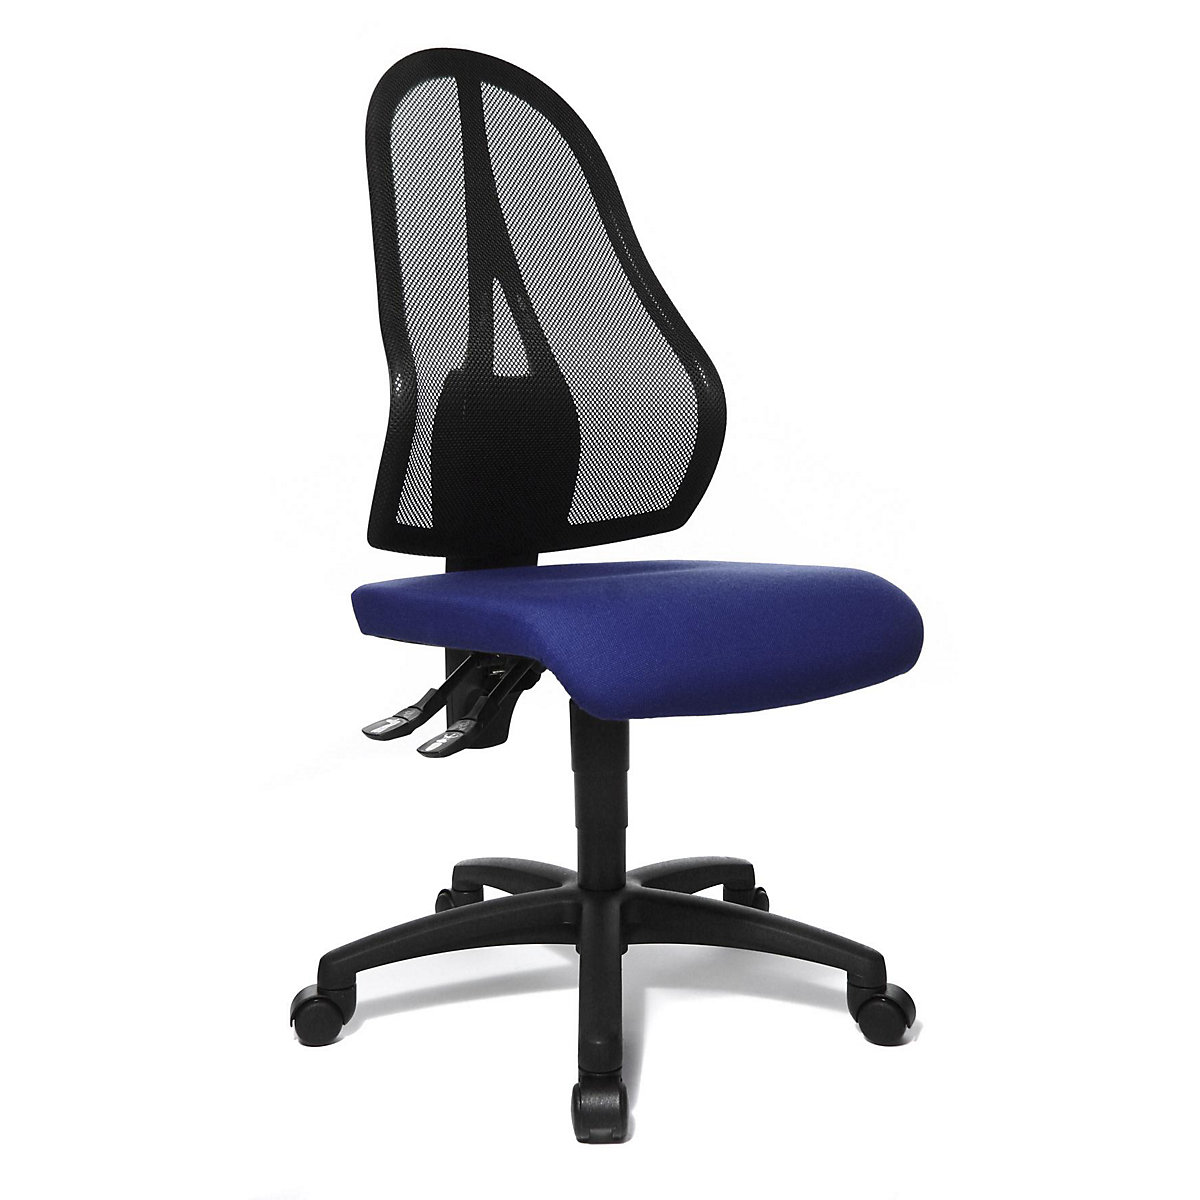 OPEN POINT P office swivel chair – Topstar, mesh back rest in black, without arm rests, royal blue seat cover-3